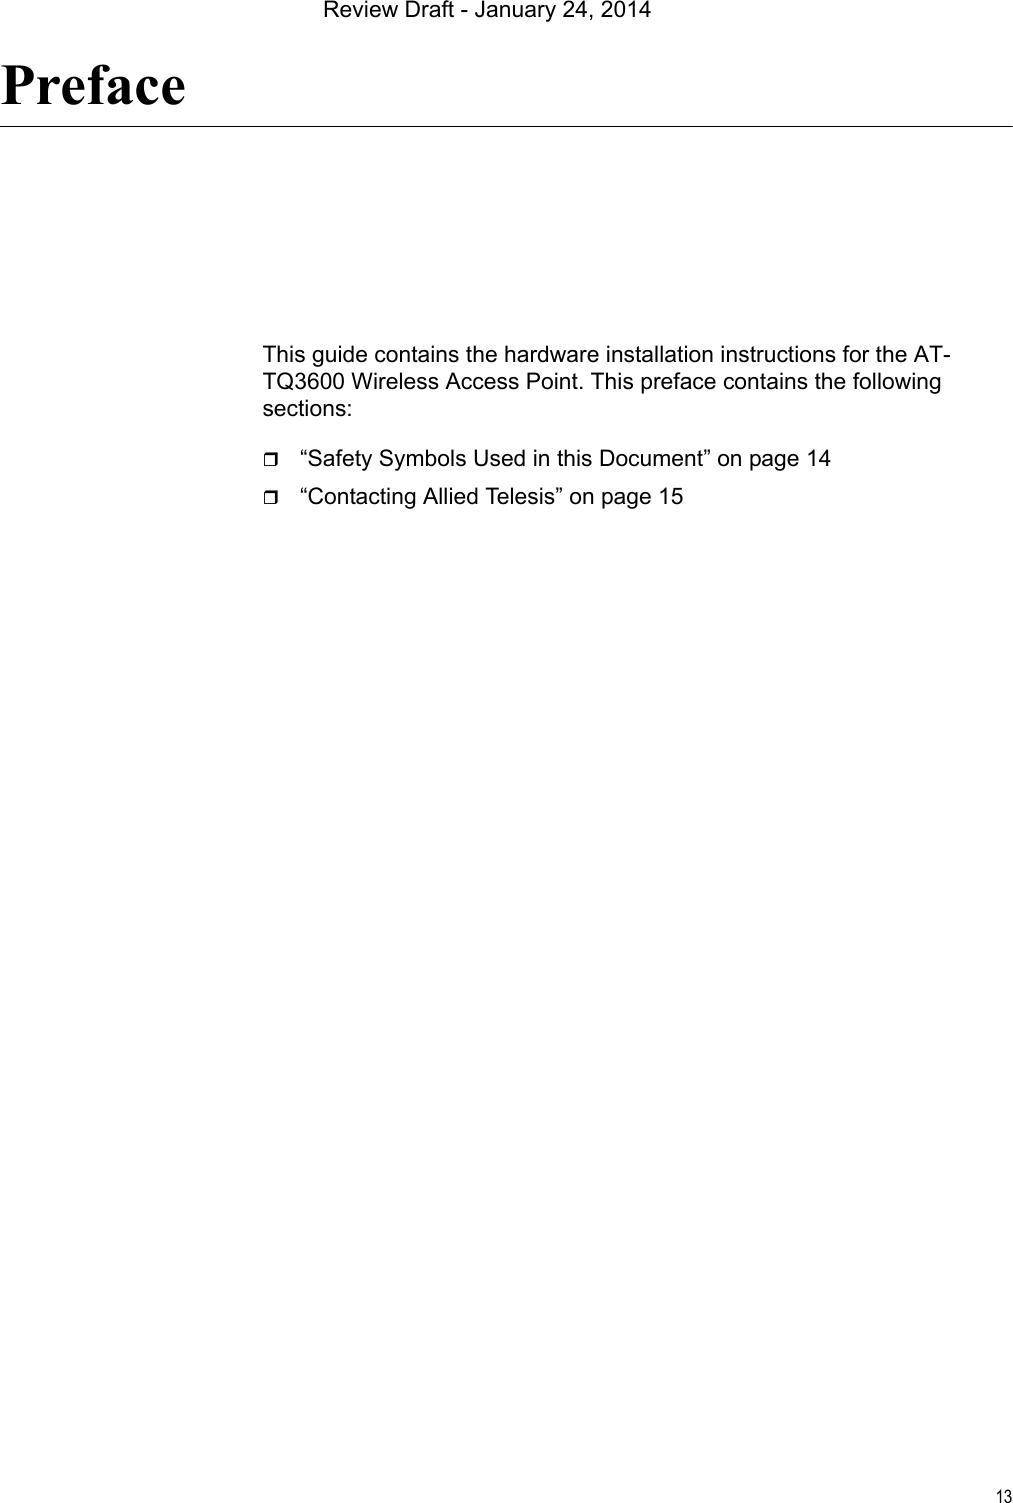 13PrefaceThis guide contains the hardware installation instructions for the AT-TQ3600 Wireless Access Point. This preface contains the following sections:“Safety Symbols Used in this Document” on page 14“Contacting Allied Telesis” on page 15Review Draft - January 24, 2014